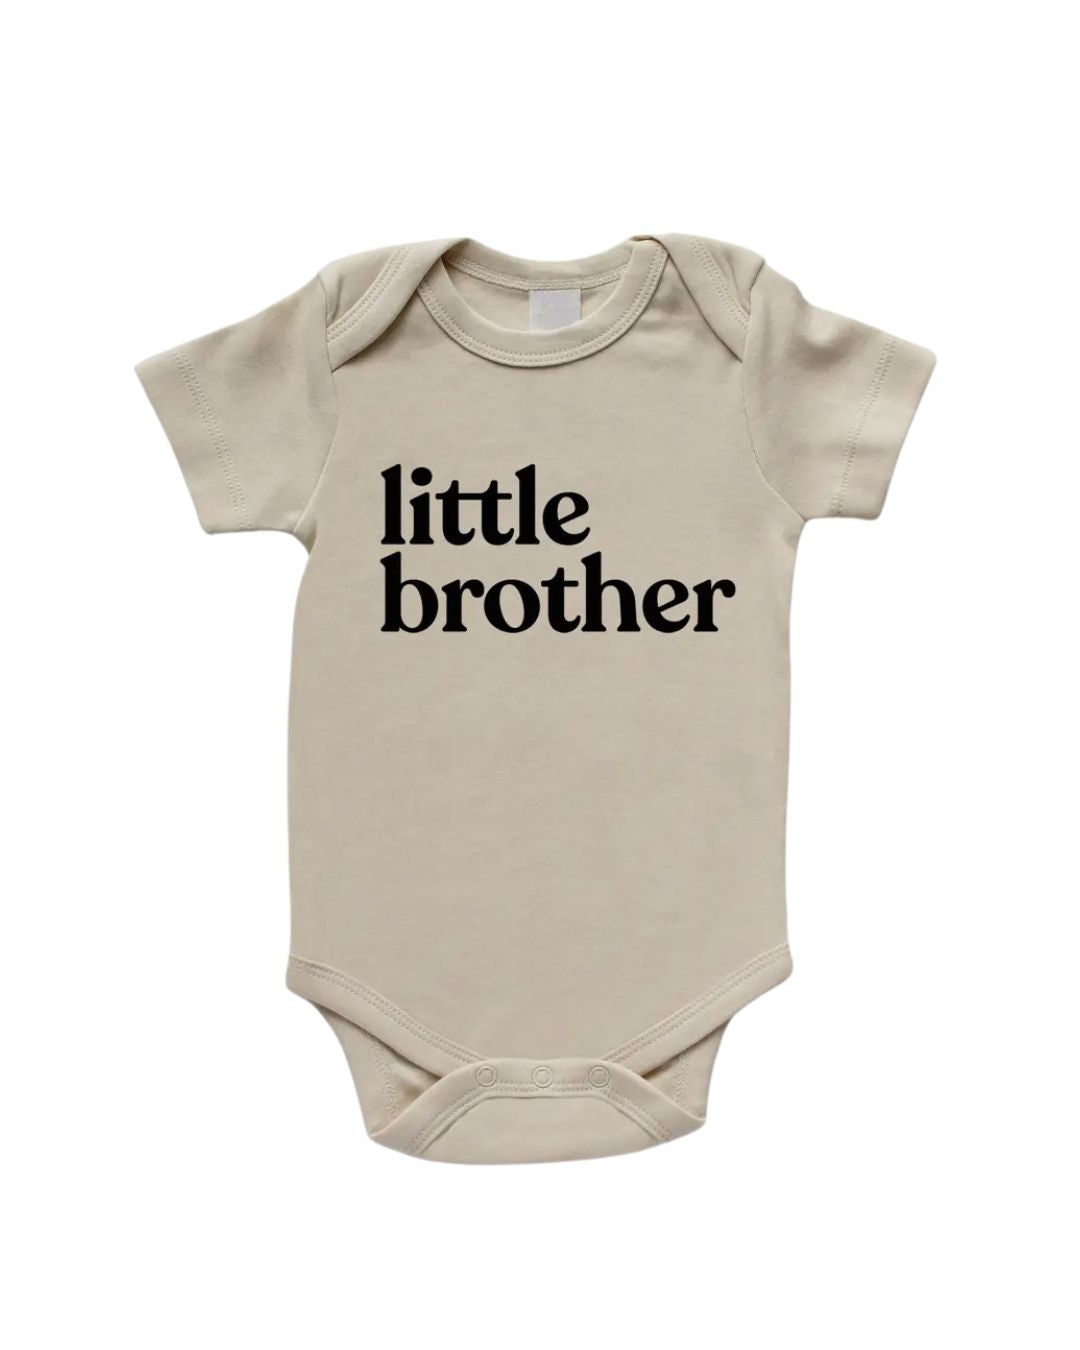 The Little Brother Bodysuit.